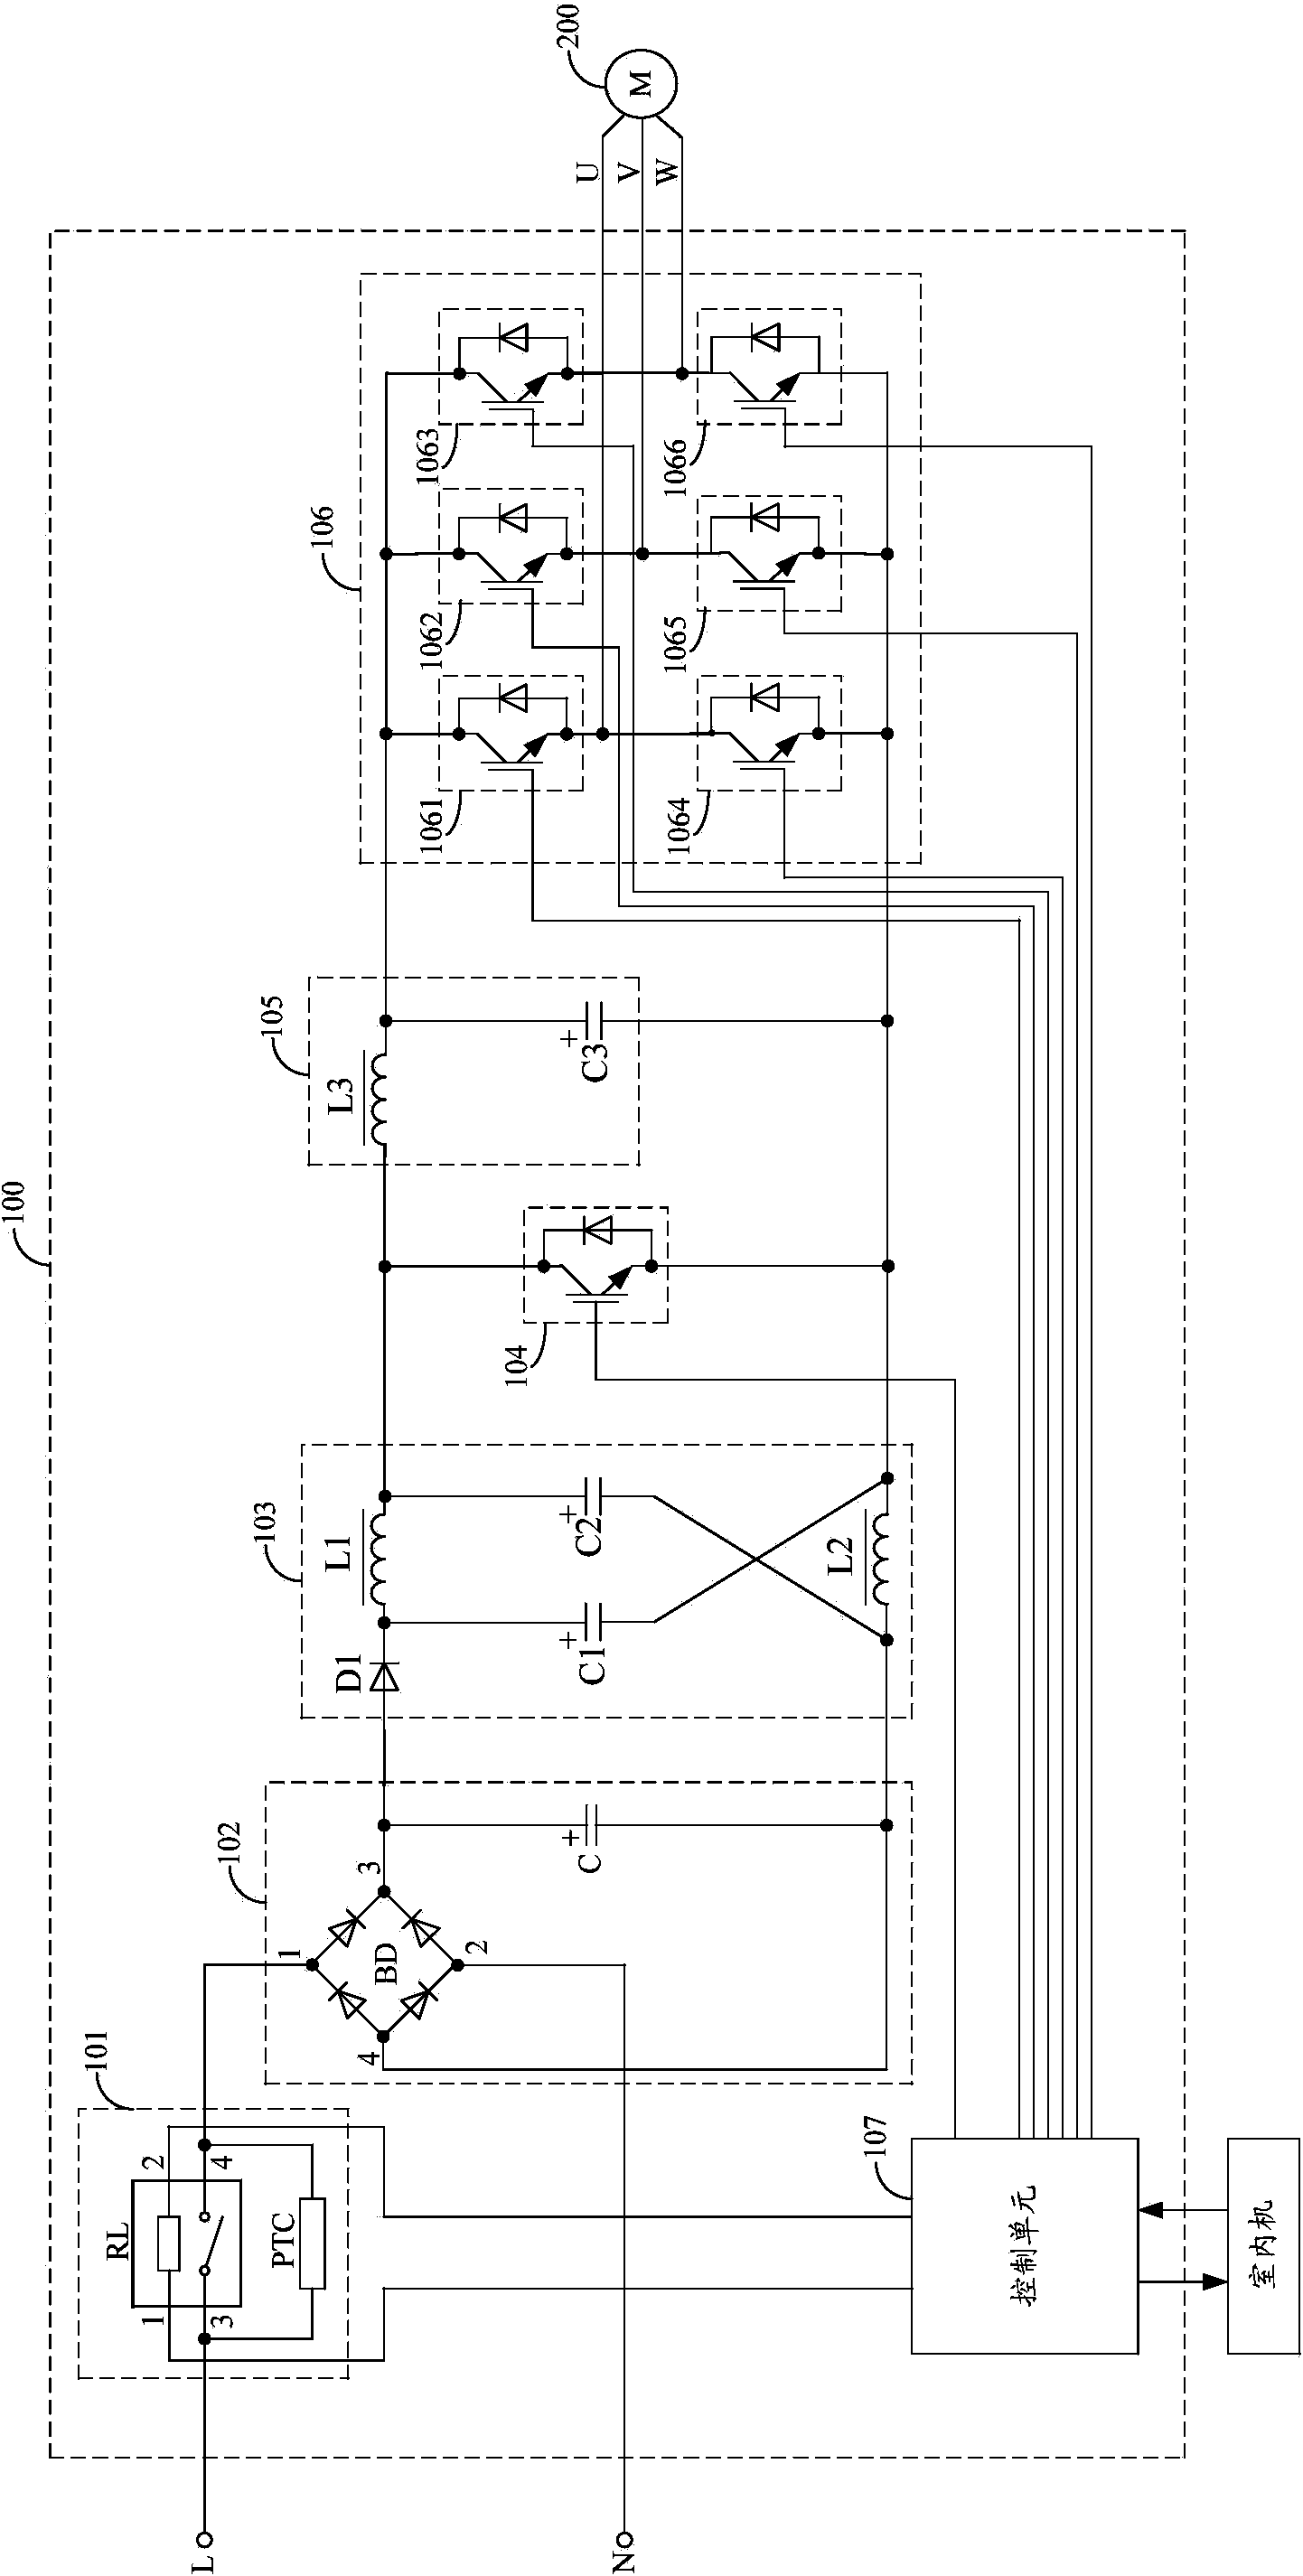 Variable frequency air-conditioner and motor control system based on Z-source converter